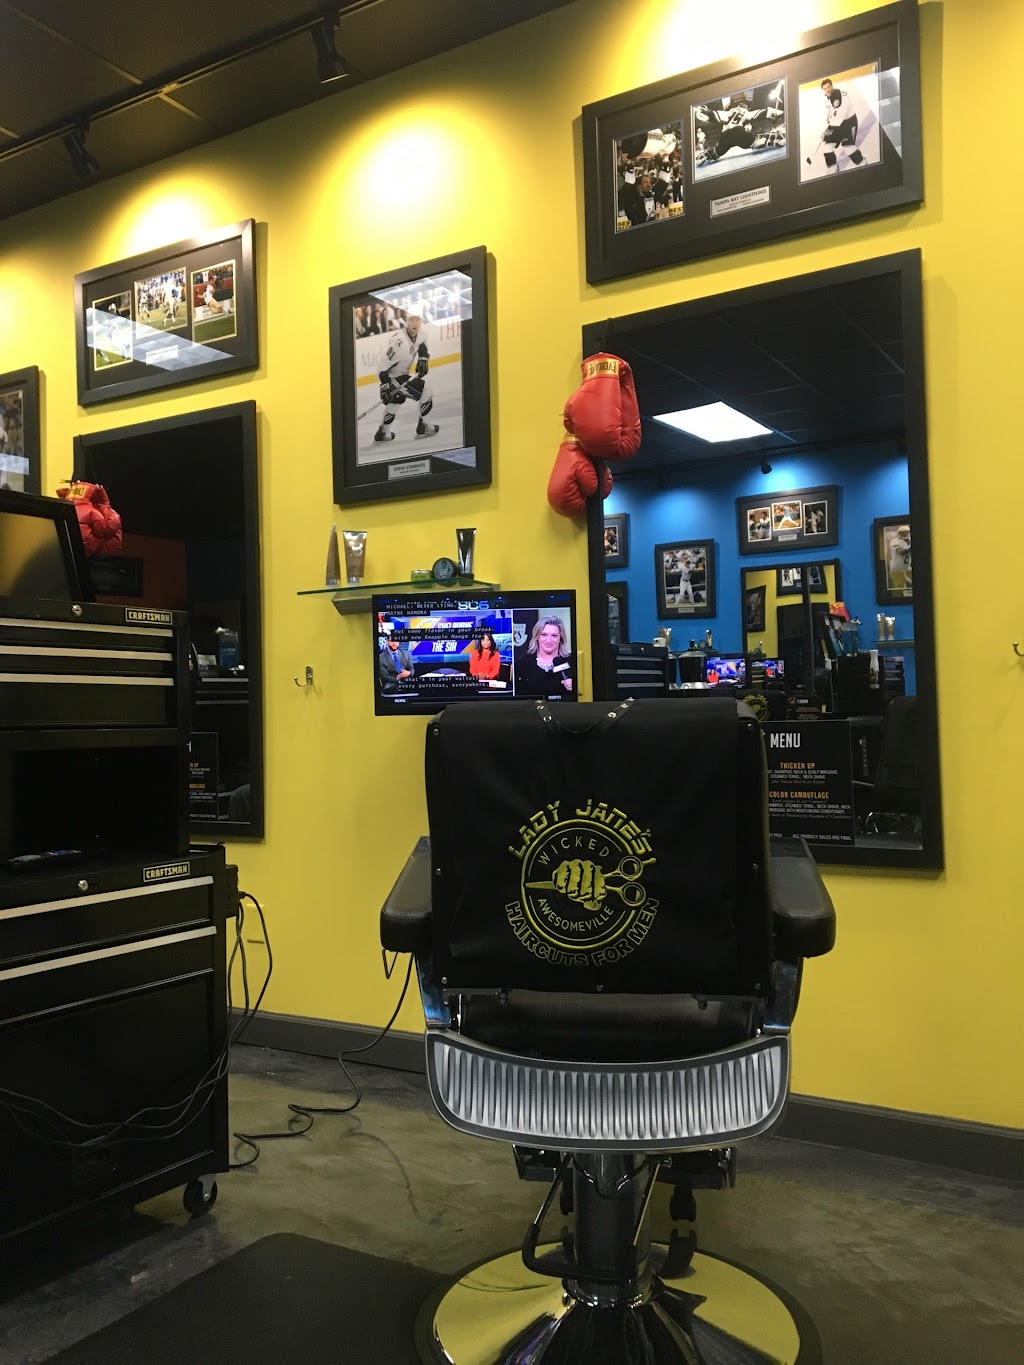 Lady Janes Haircuts for Men (University Blvd - Just East of Rouse Rd) | 11551 University Blvd, Orlando, FL 32817, USA | Phone: (407) 885-4041